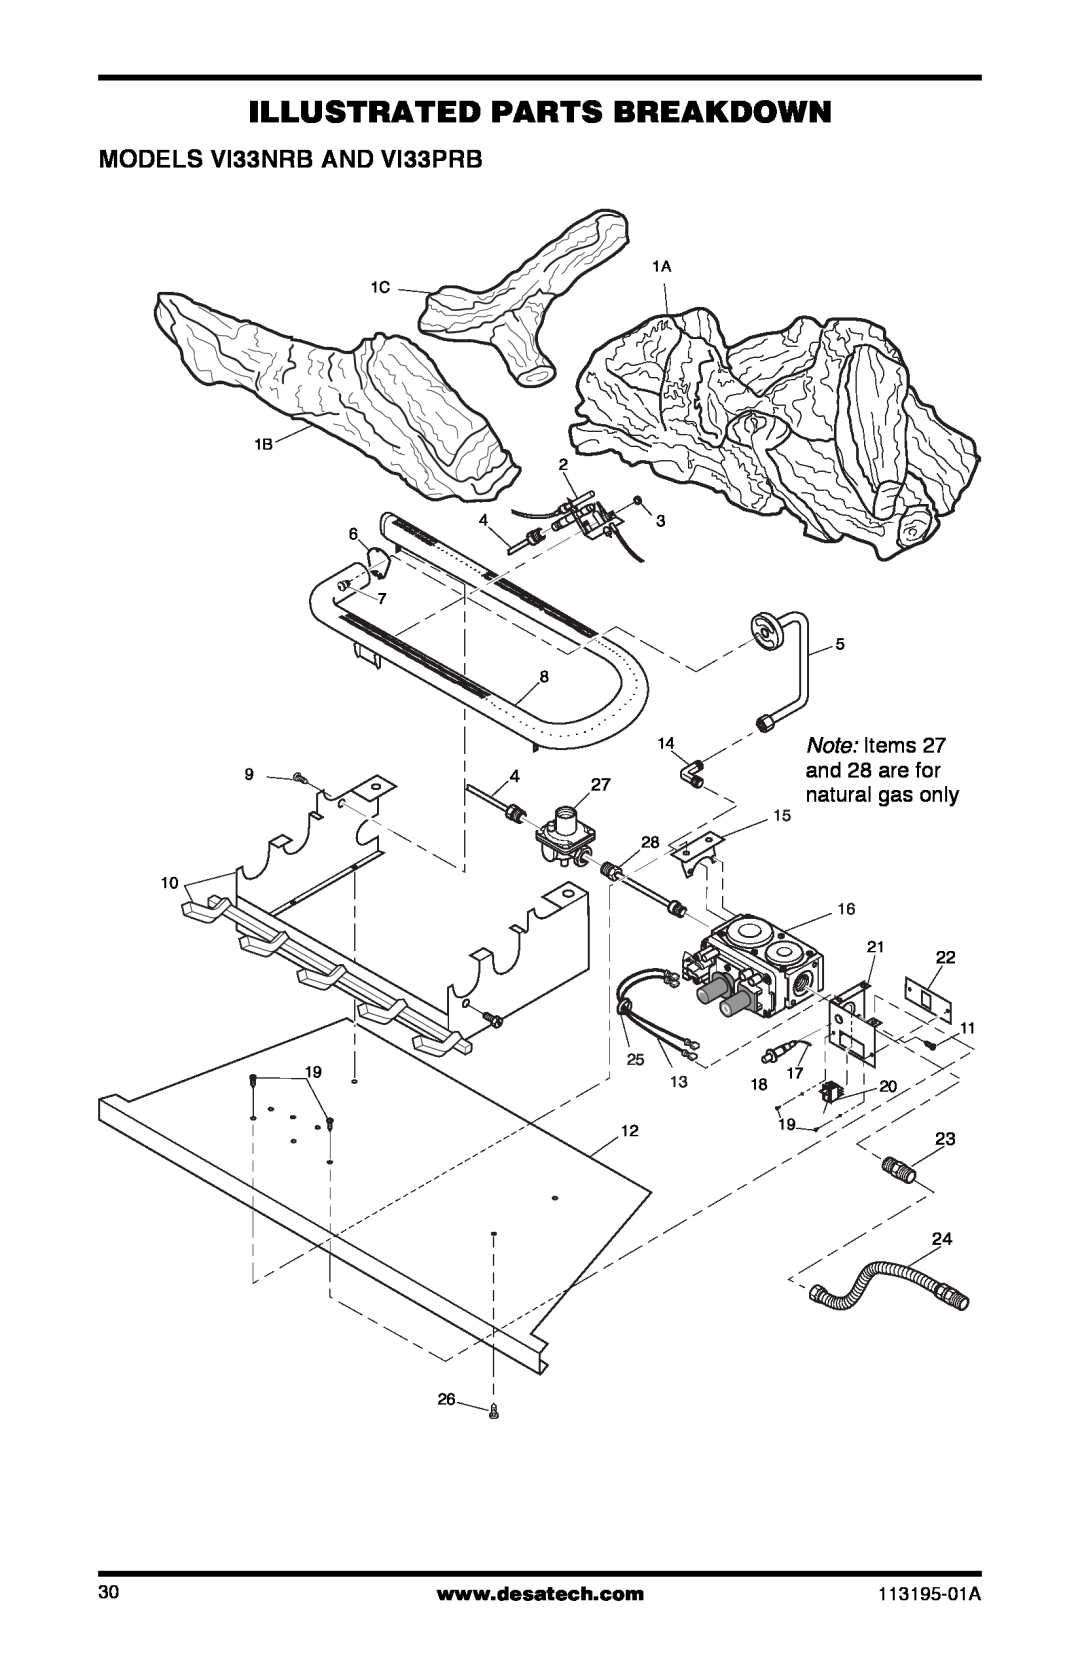 Desa installation manual Illustrated Parts Breakdown, MODELS VI33NRB AND VI33PRB, natural gas only, 113195-01A 